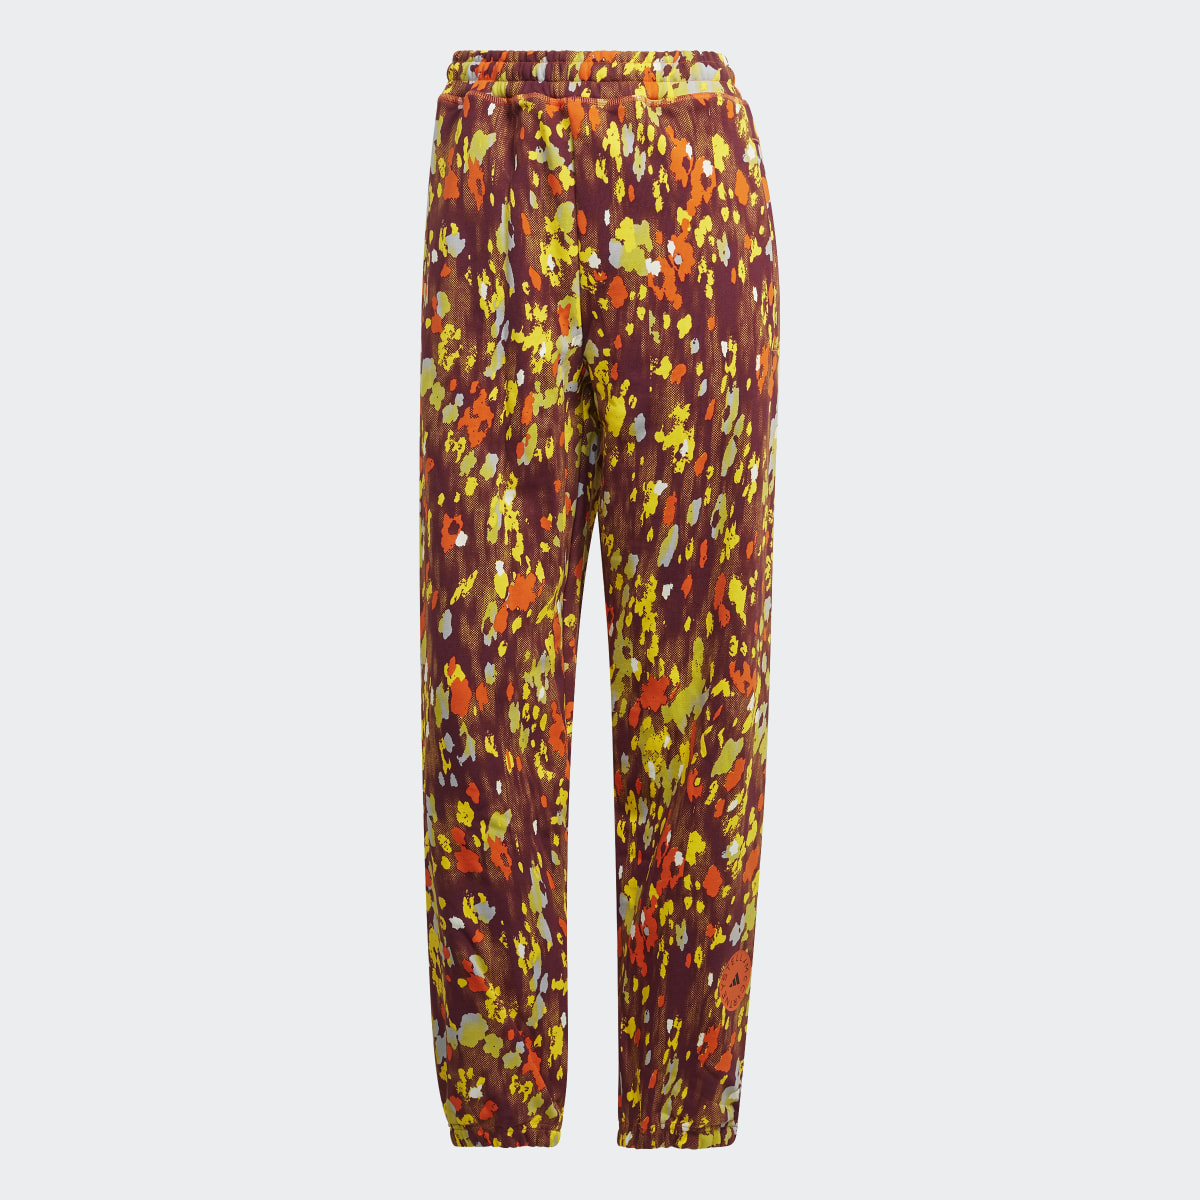 Adidas by Stella McCartney Floral Printed Woven Track Joggers. 5